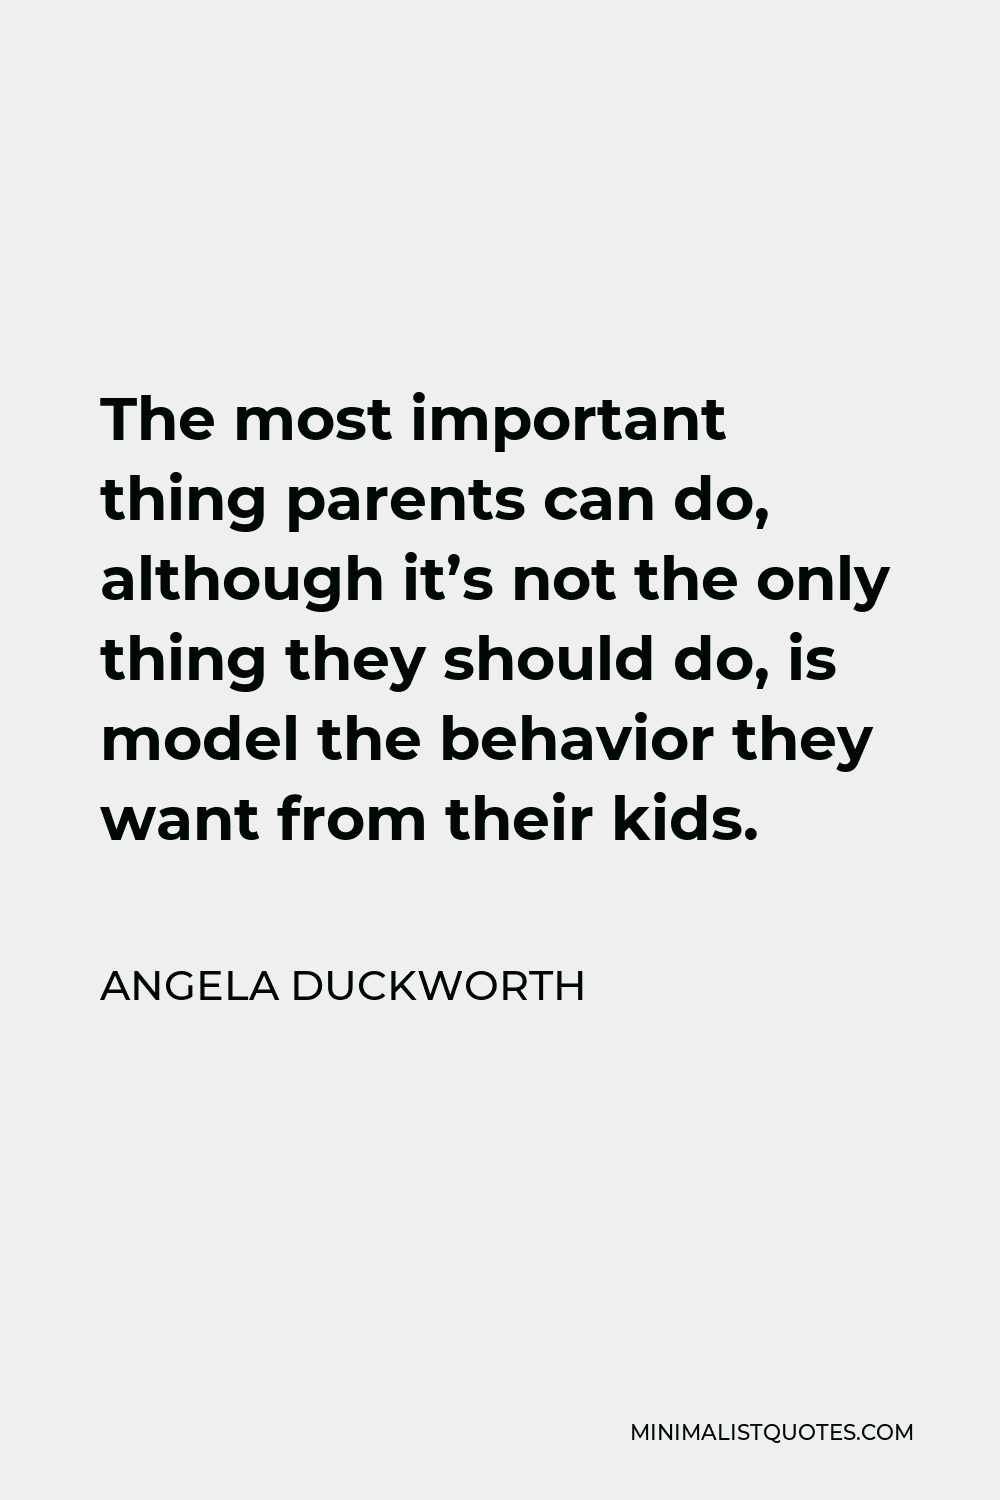 Angela Duckworth Quote - The most important thing parents can do, although it’s not the only thing they should do, is model the behavior they want from their kids.